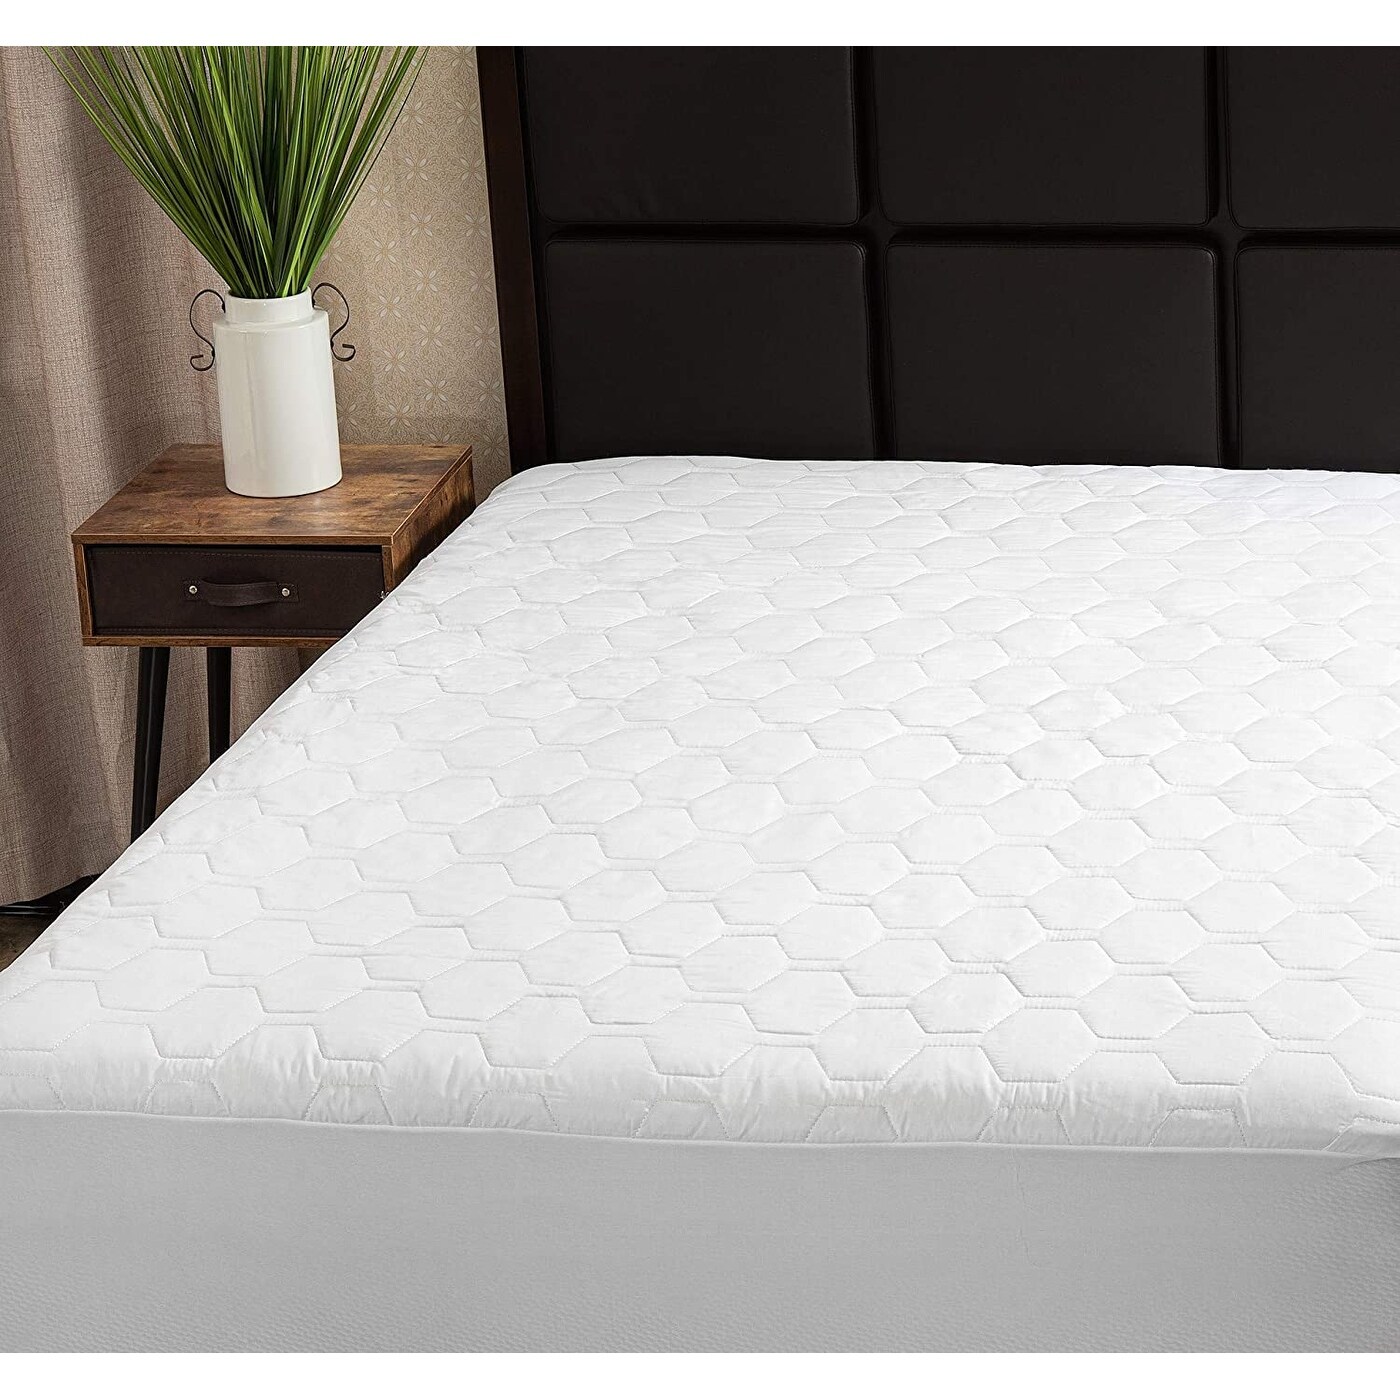 Mattress Pad Topper Cover TWIN Thick Protector Padded Bed Quilted Hypoallergenic